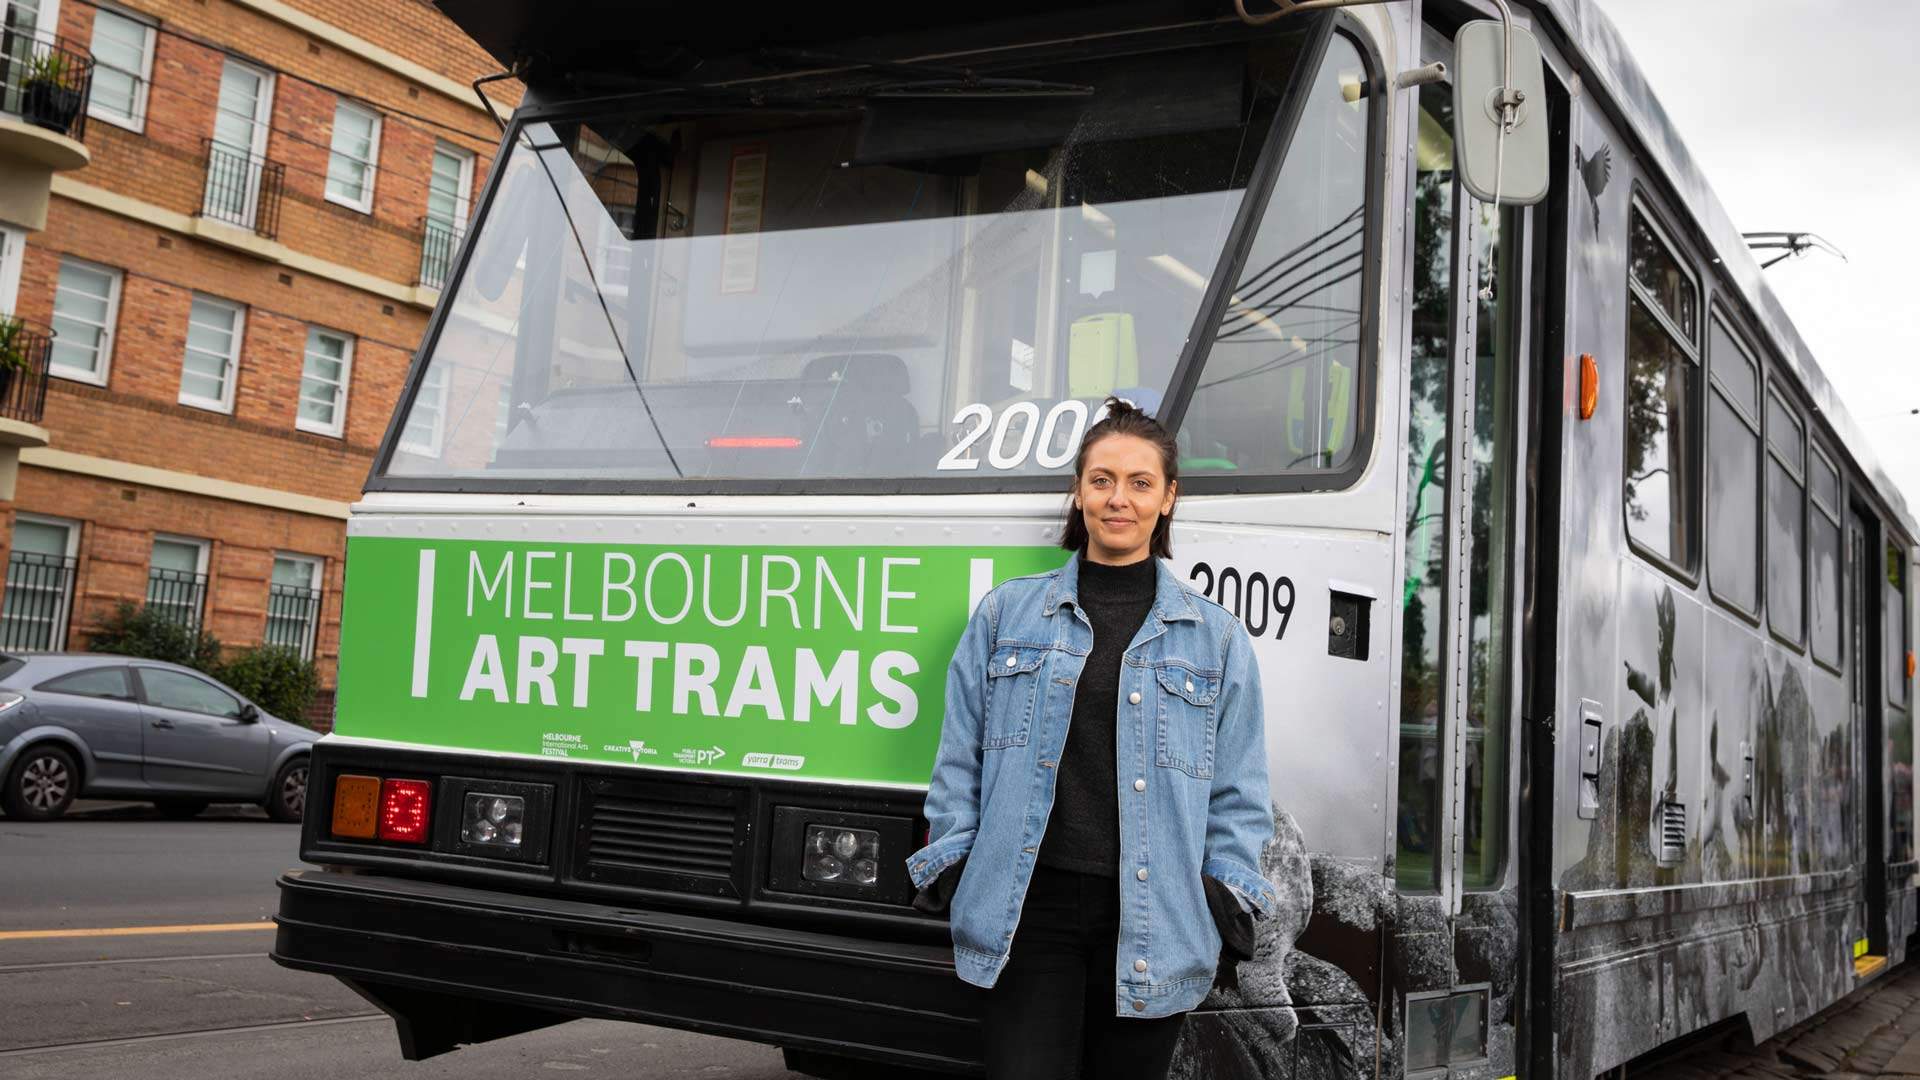 You Can Now Catch This Art-Covered Tram Through Melbourne's CBD